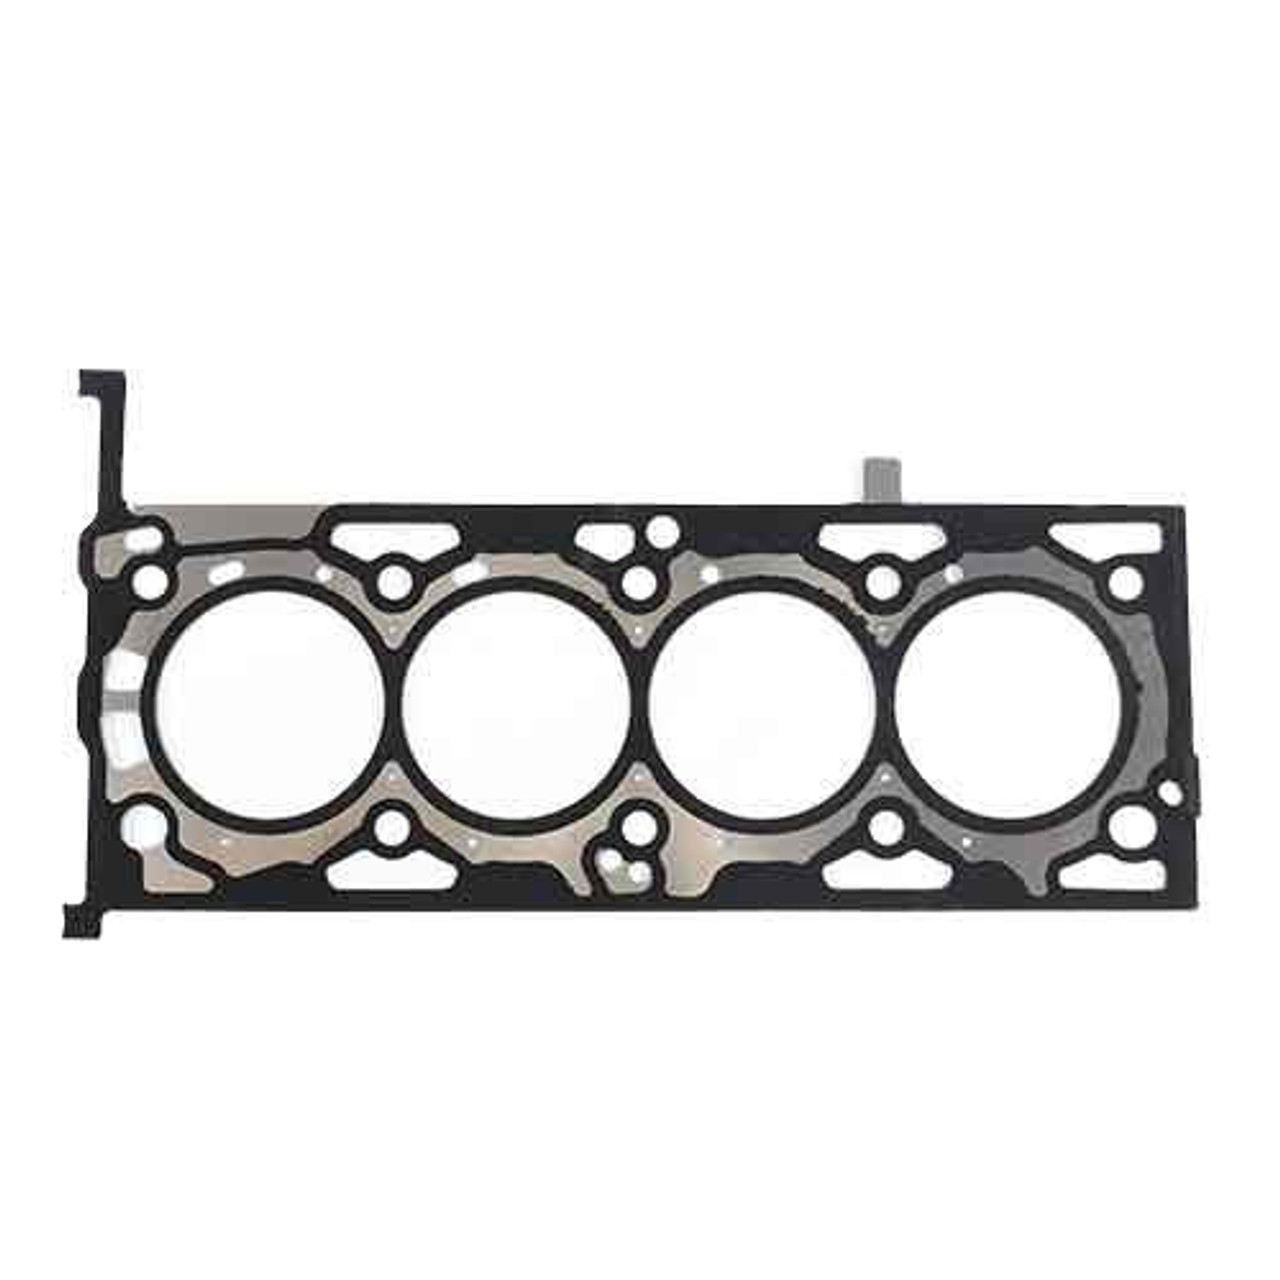 Head Gasket - 2017 Cadillac CTS 2.0L Engine Parts # HG348ZE17